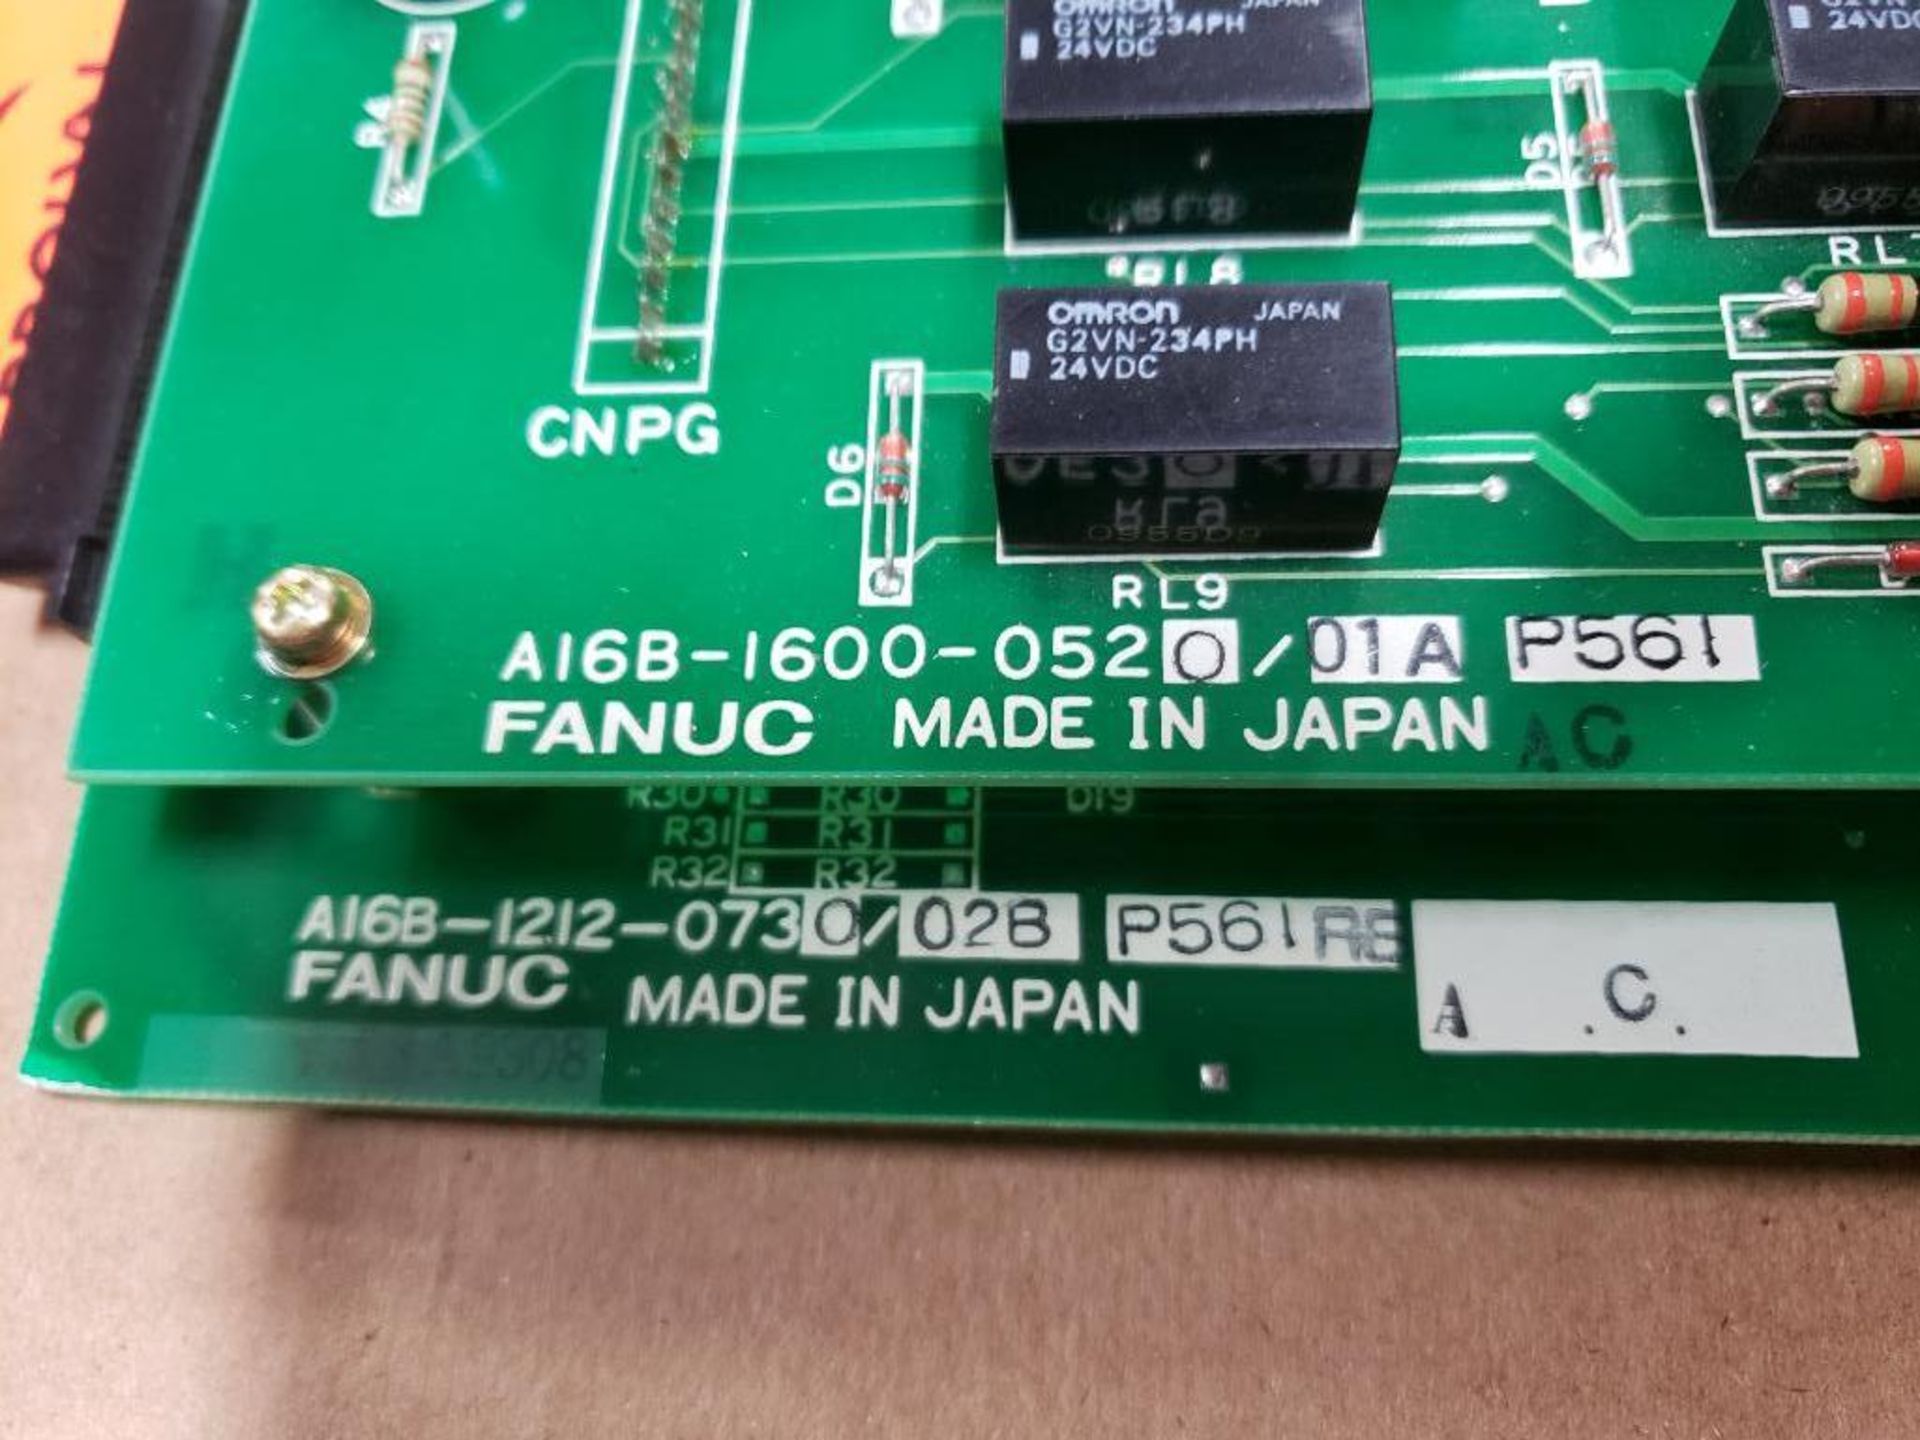 Fanuc control board. Part number A16B-1600-0520/01A and A16B-1212-0730/02B. - Image 4 of 6